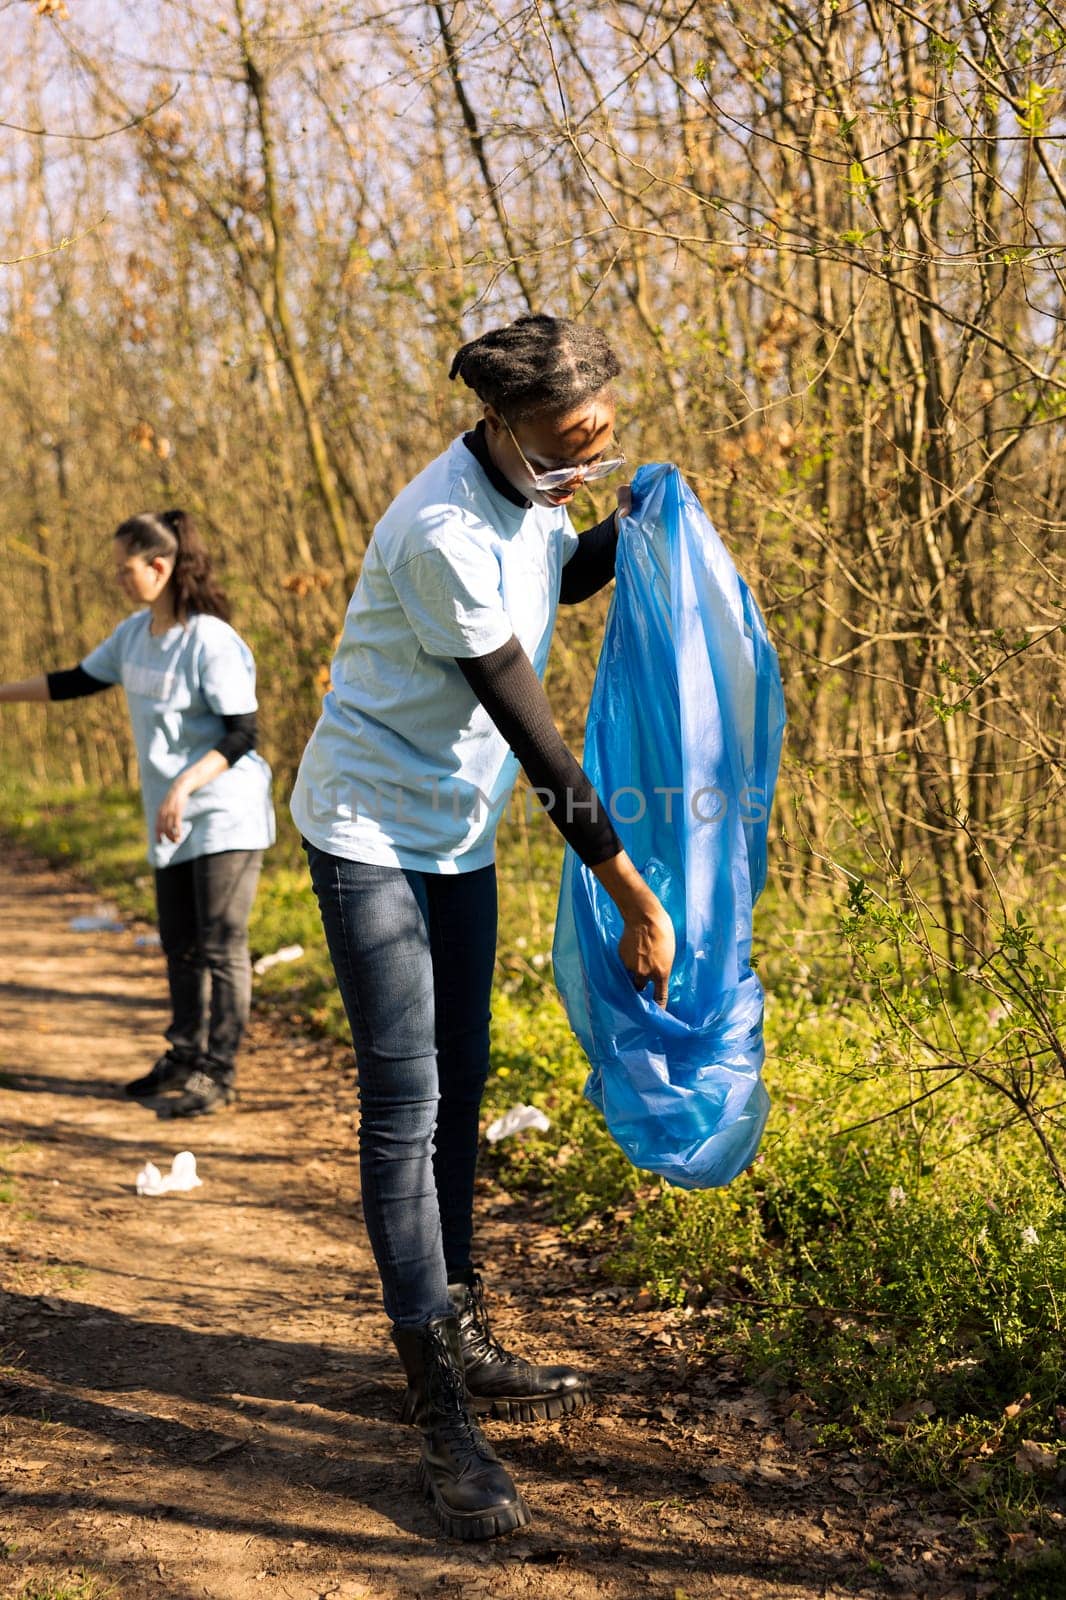 Woman volunteer grabbing junk and plastic waste with a claw tool, clearing natural ecosystem of garbage. African american girl doing voluntary work against illegal dumping.